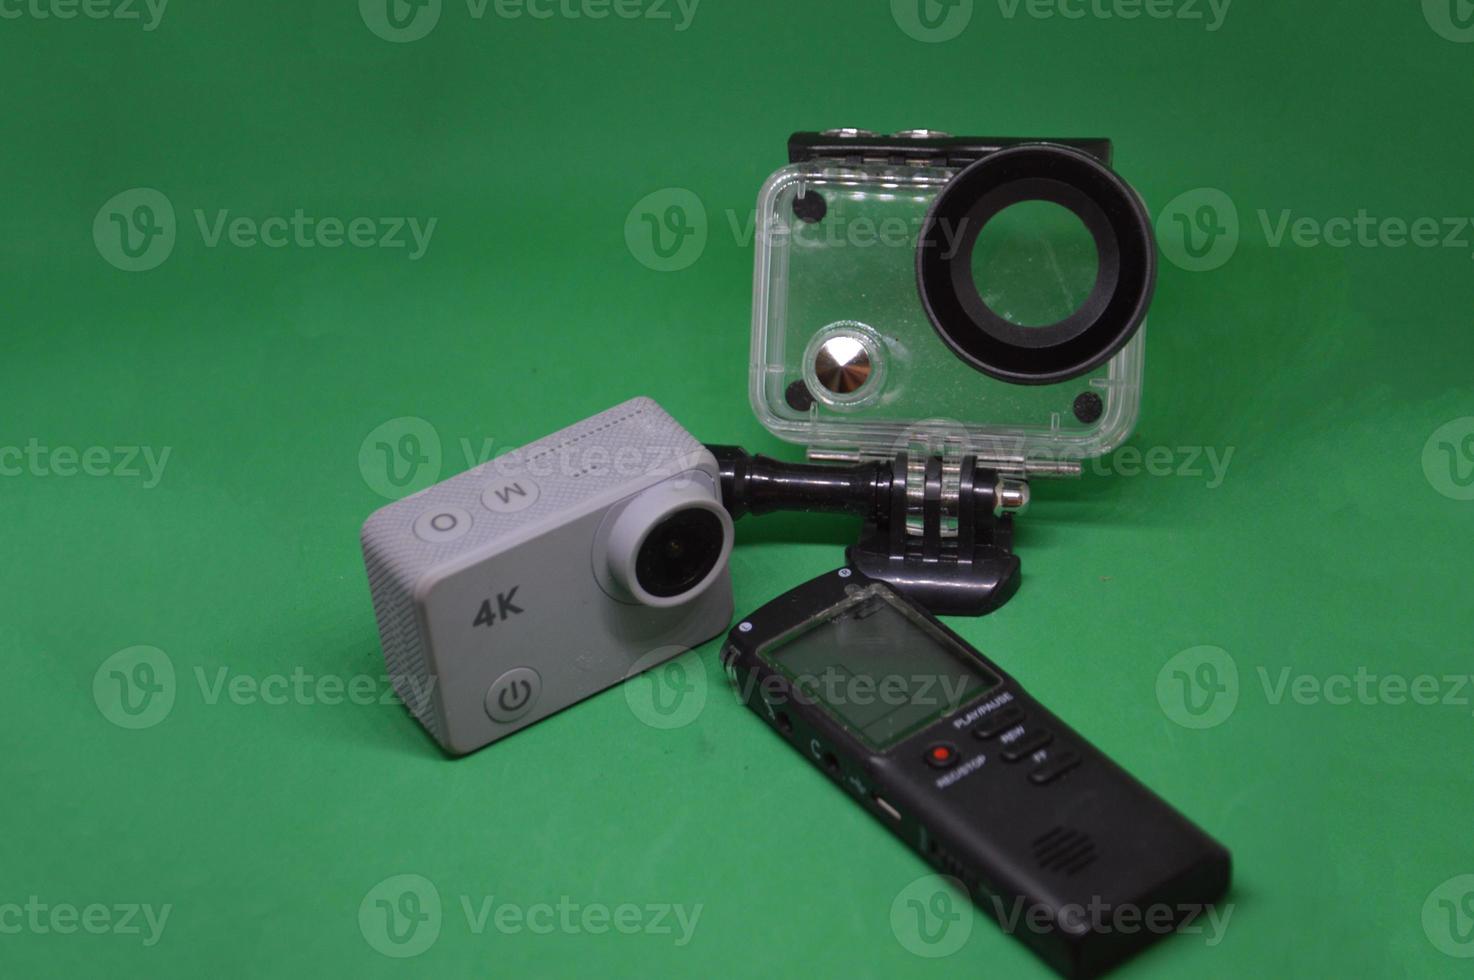 Action camera and accessories for shooting videos and photos while traveling